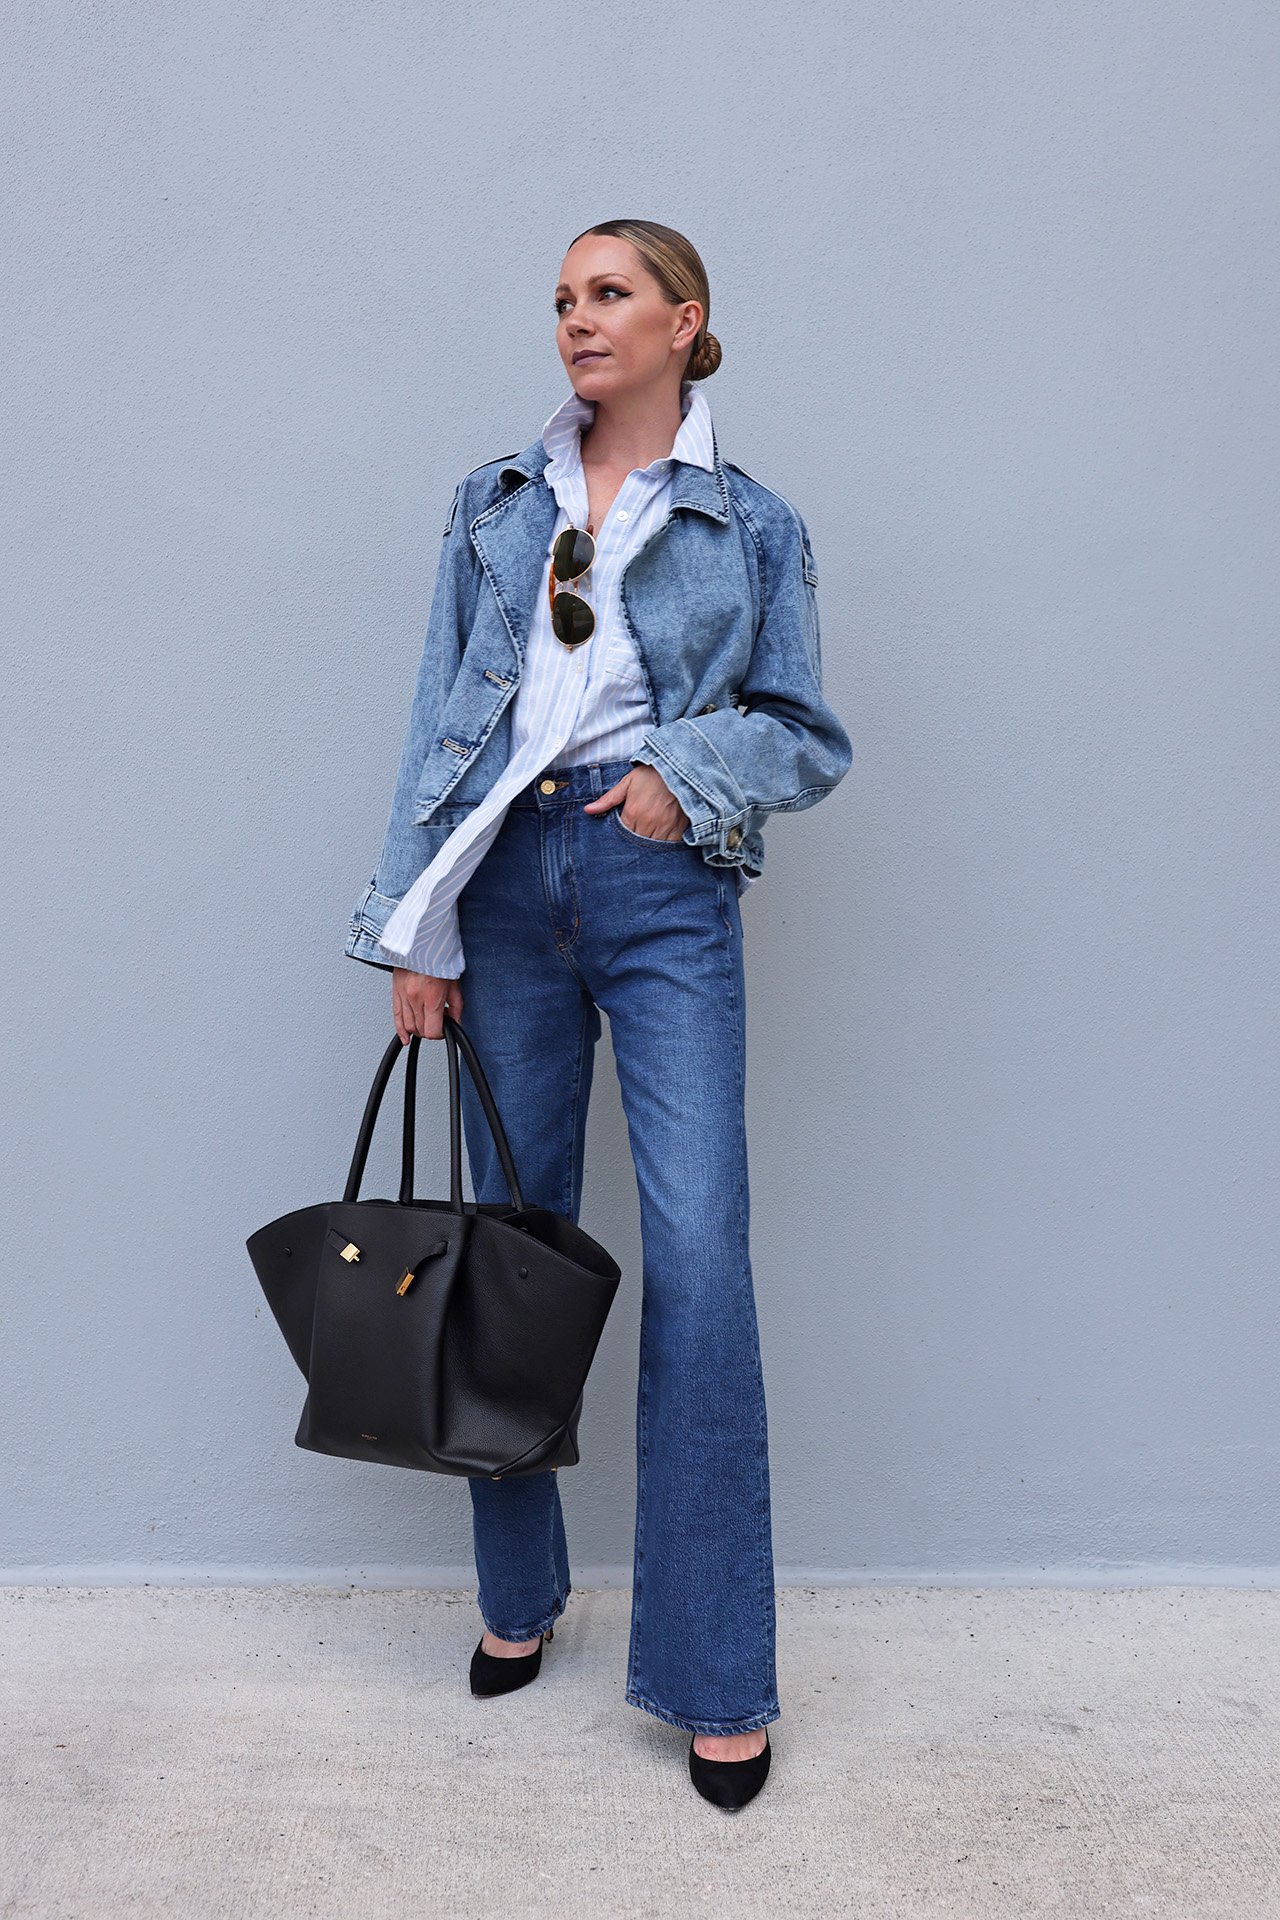 How to Style Wide-Leg Jeans: 5 Outfit Ideas - Atlantic-Pacific